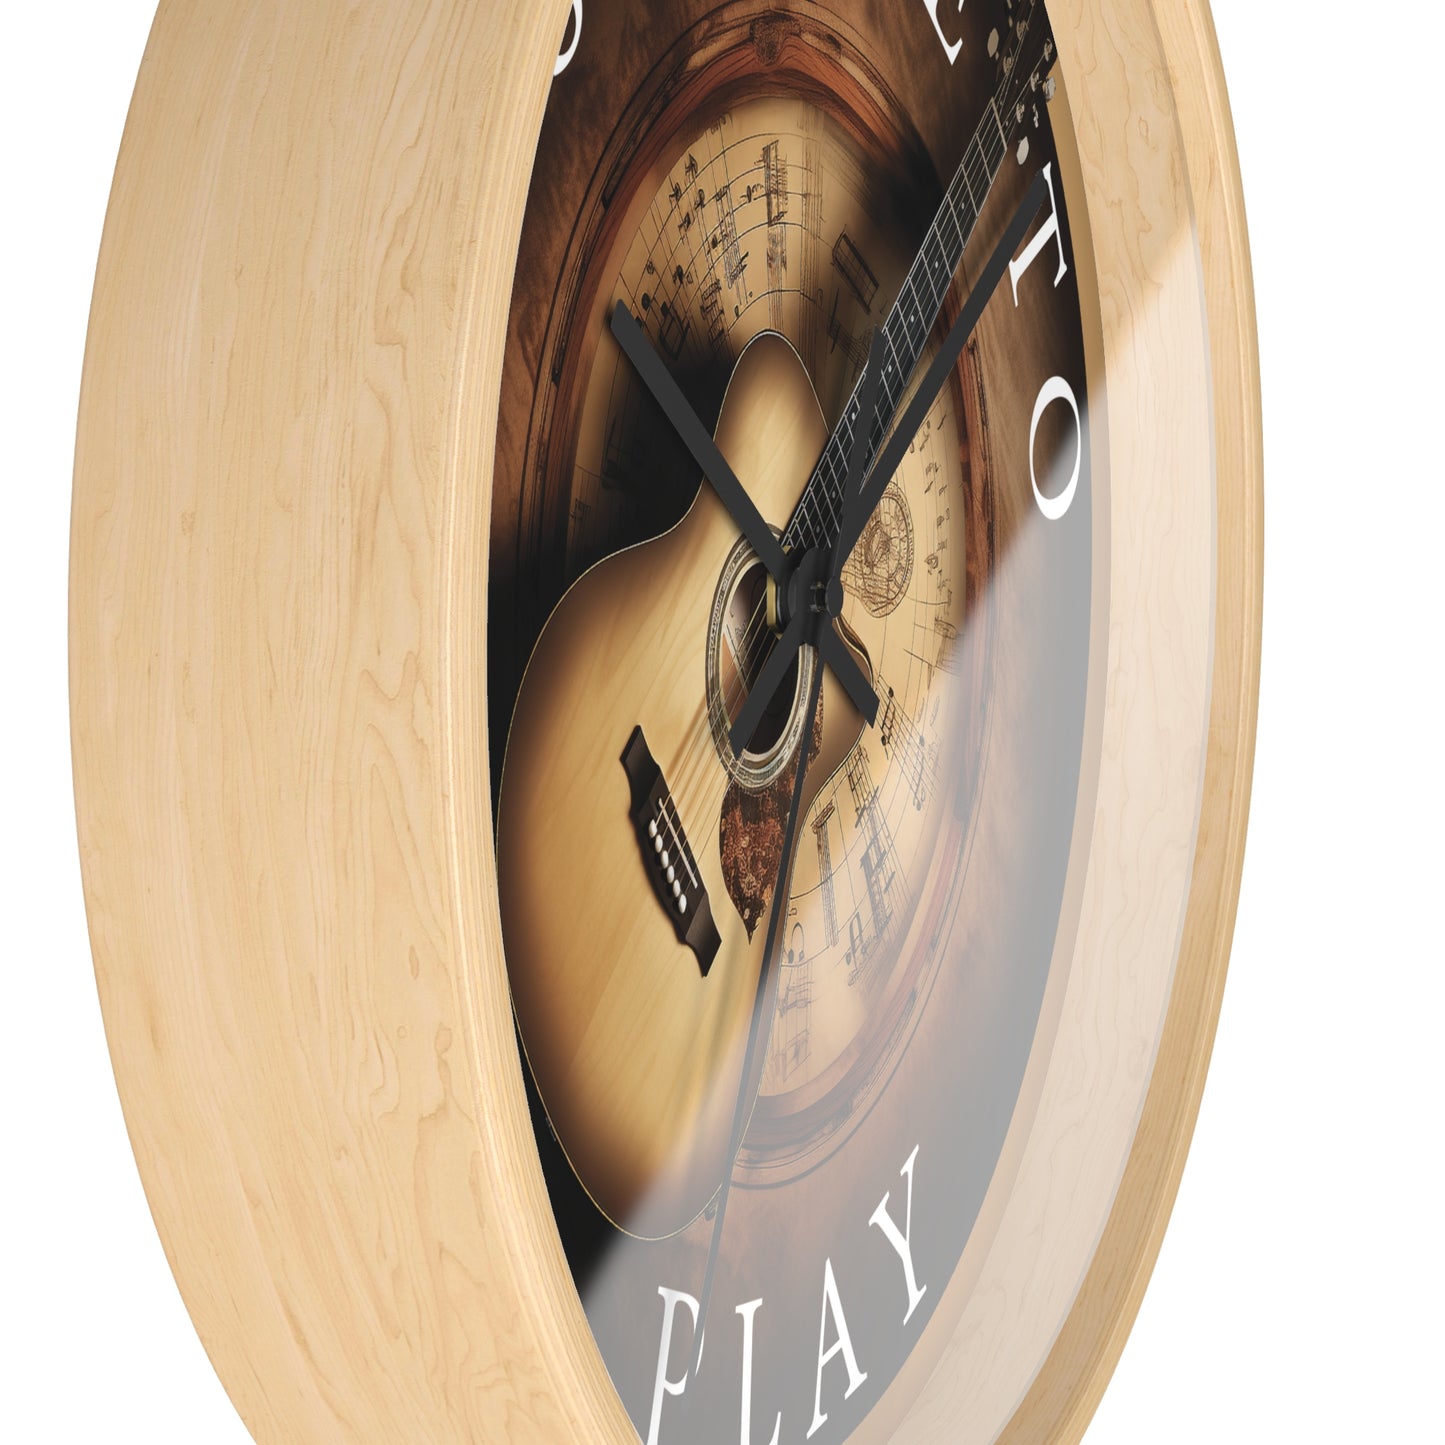 It's TIME to PLAY  music-themed 10" Wall Clock, with acoustic guitar in a surrealistic design, 2" black or light wood frame and plexiglass